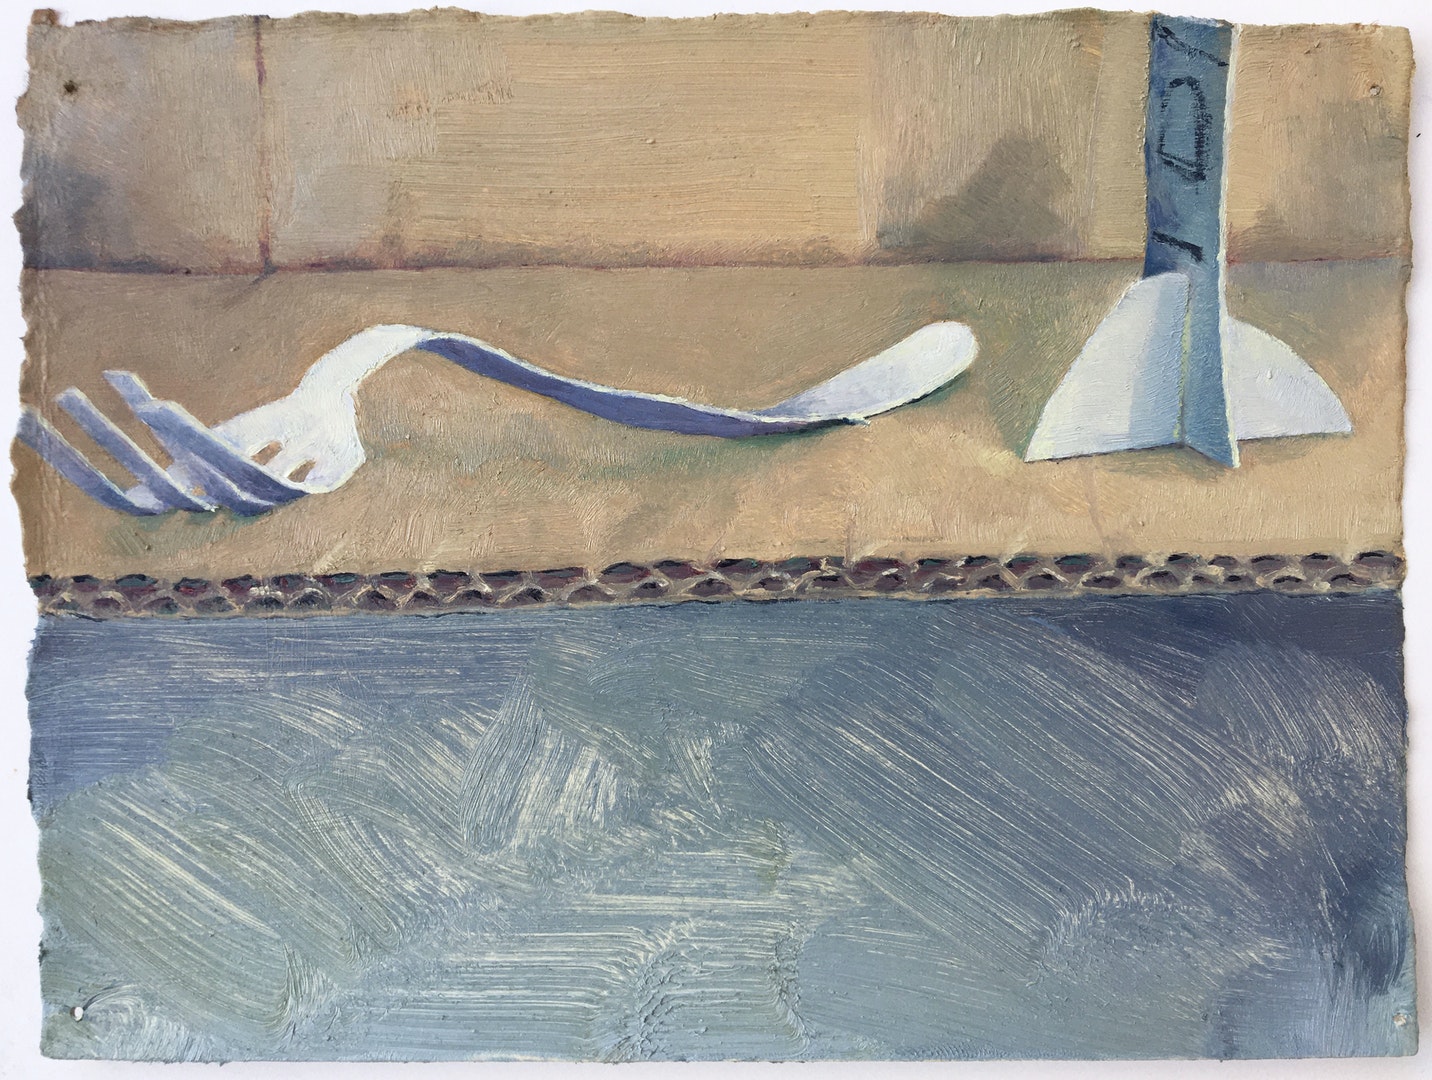 'Fork and Deodrant', Willa Hilditch, Oil on paper, 14 x 18 cm